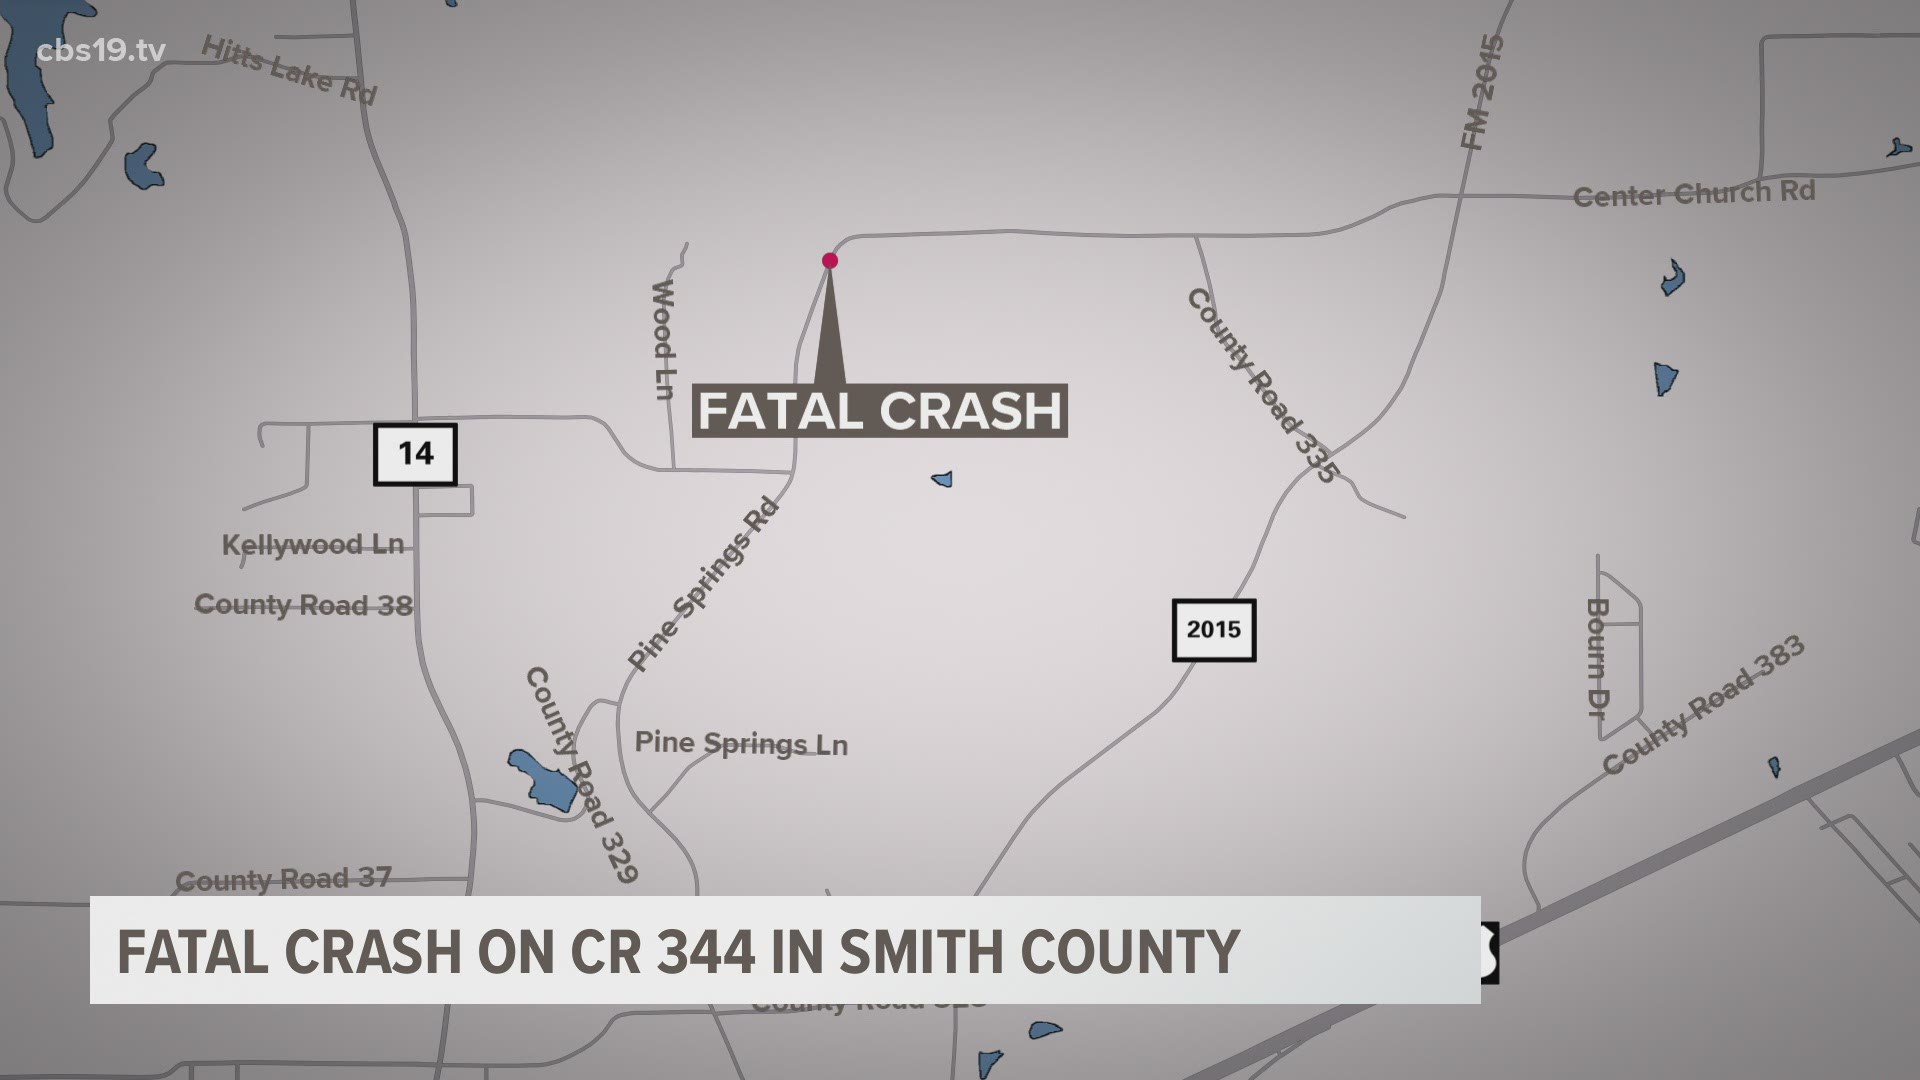 The accident occurred on CR 344 south of the city of Tyler in Smith County.